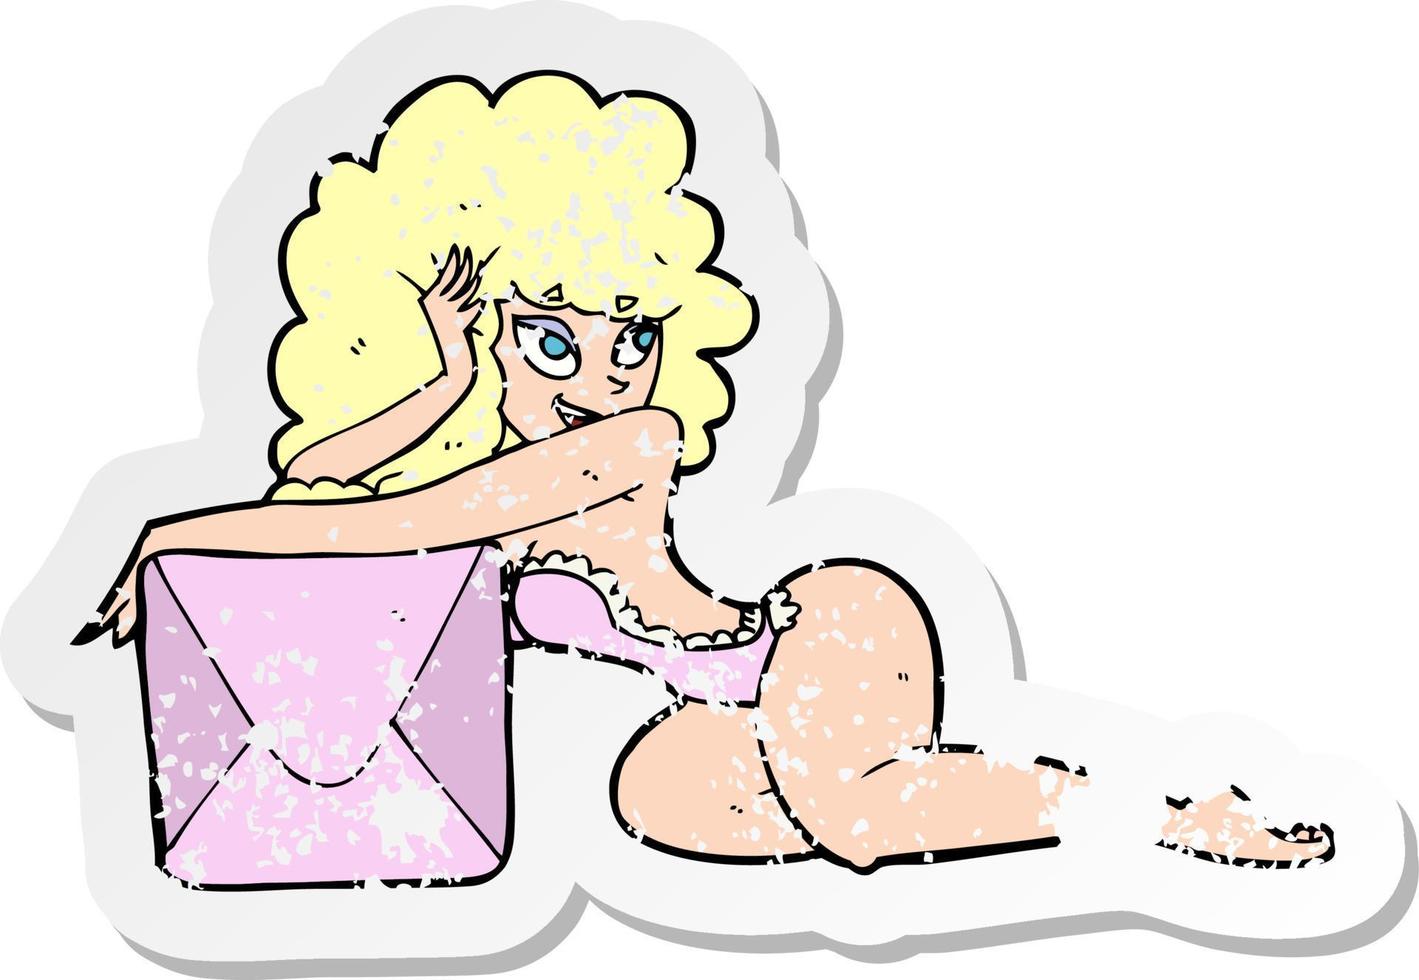 retro distressed sticker of a cartoon pin up woman with box vector